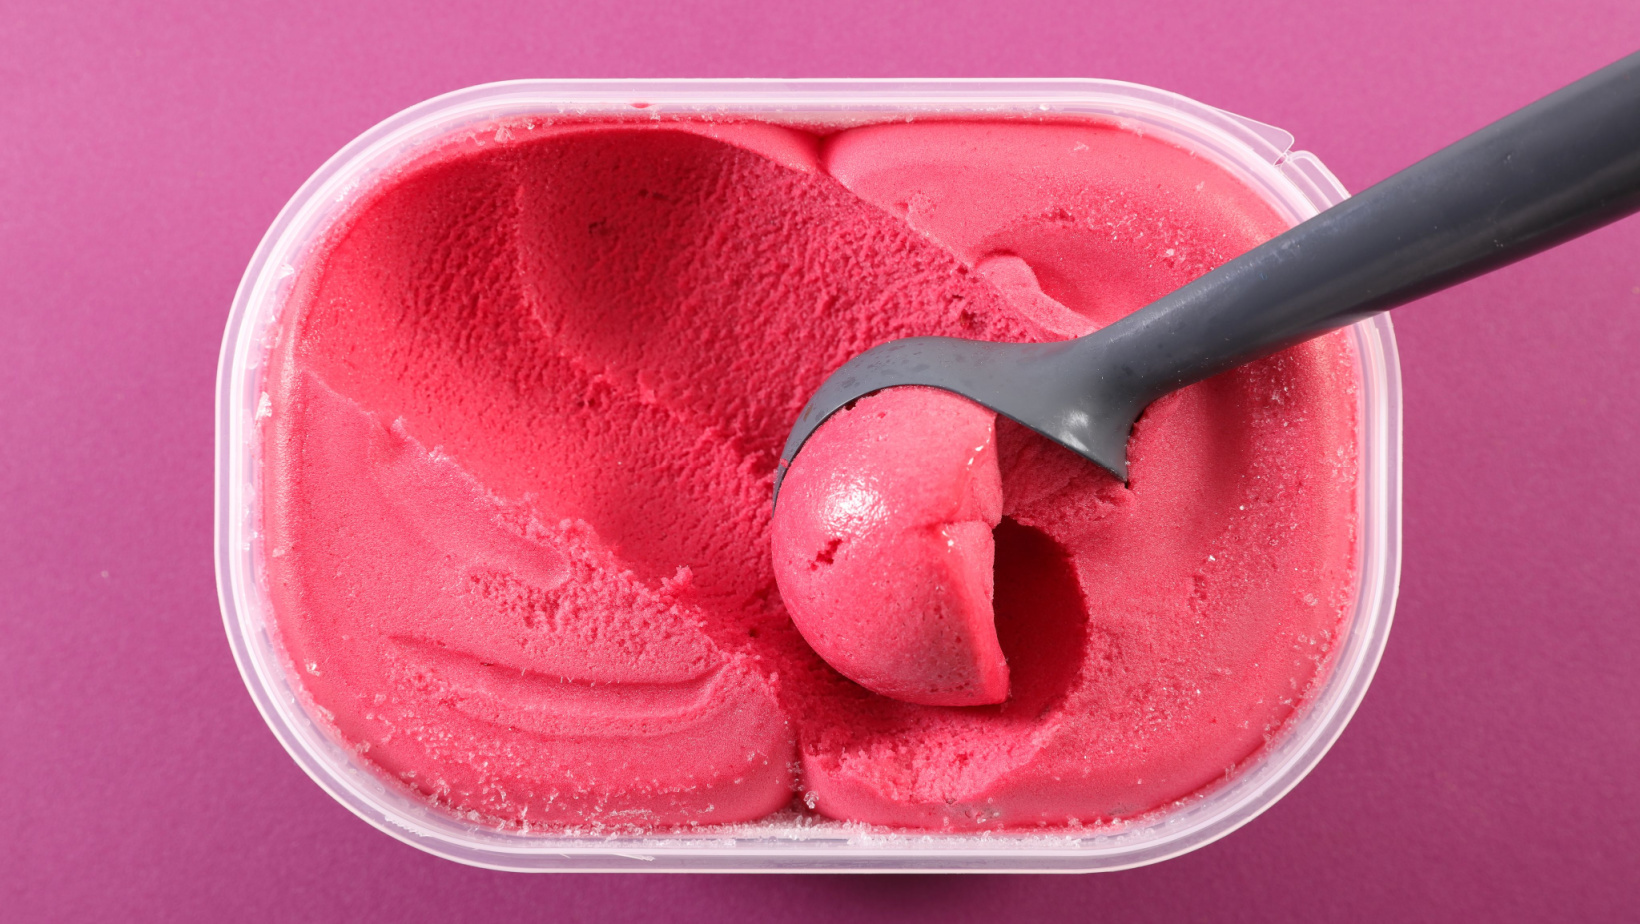 Why are stabilizers used in ice cream? — ICE CREAM SCIENCE